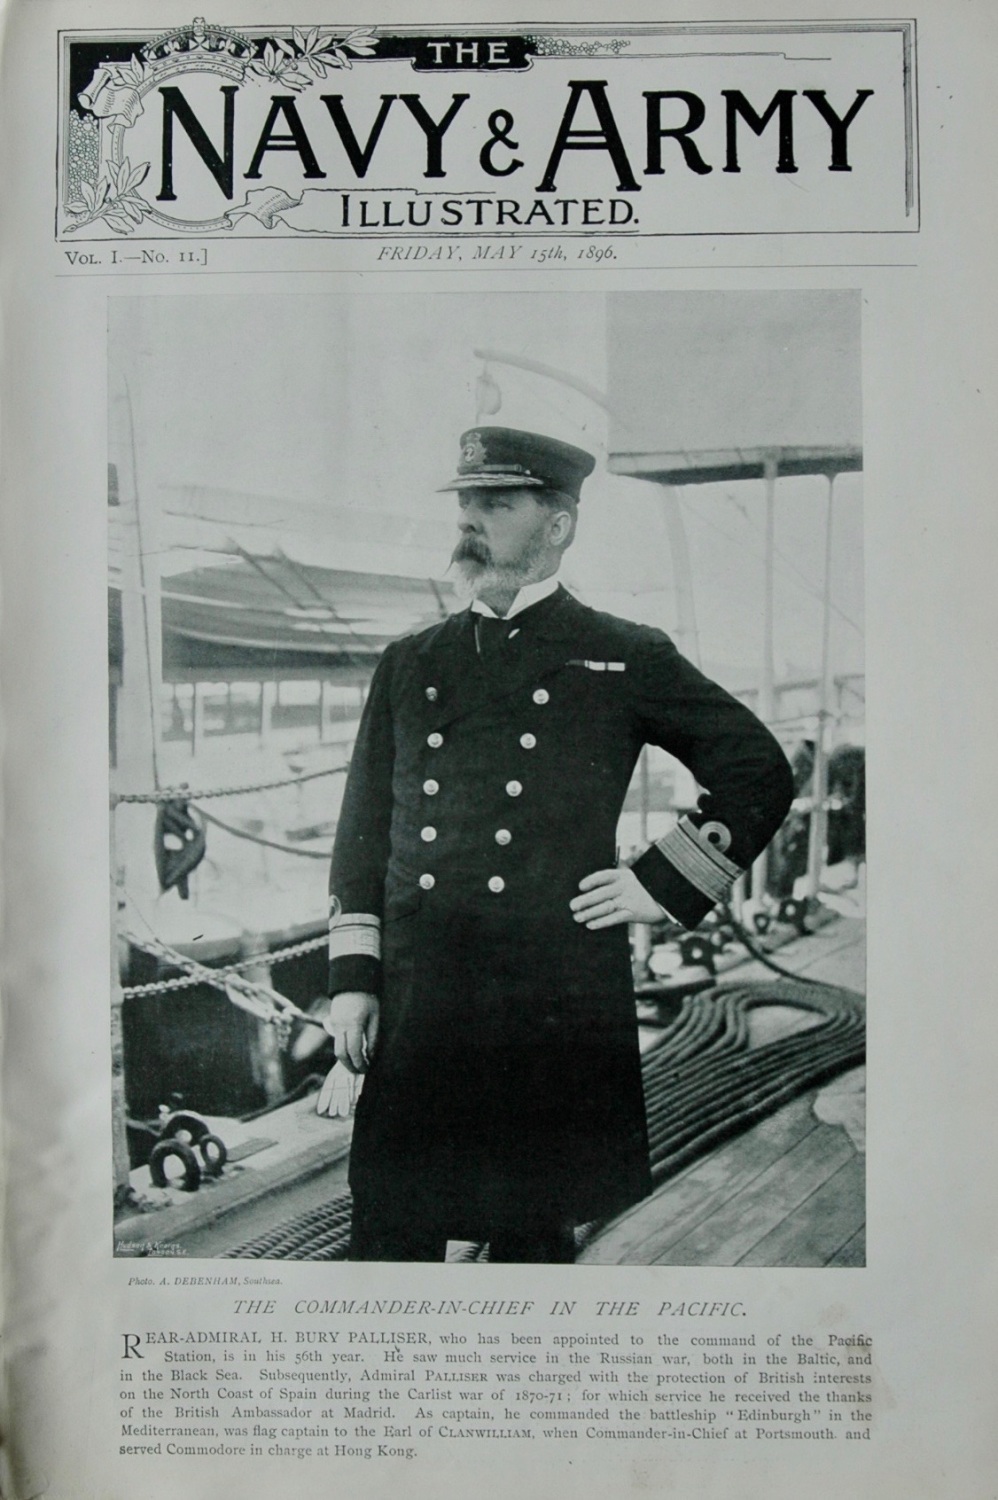 Original full copy of Navy & Army Illustrated, May 15th, 1896